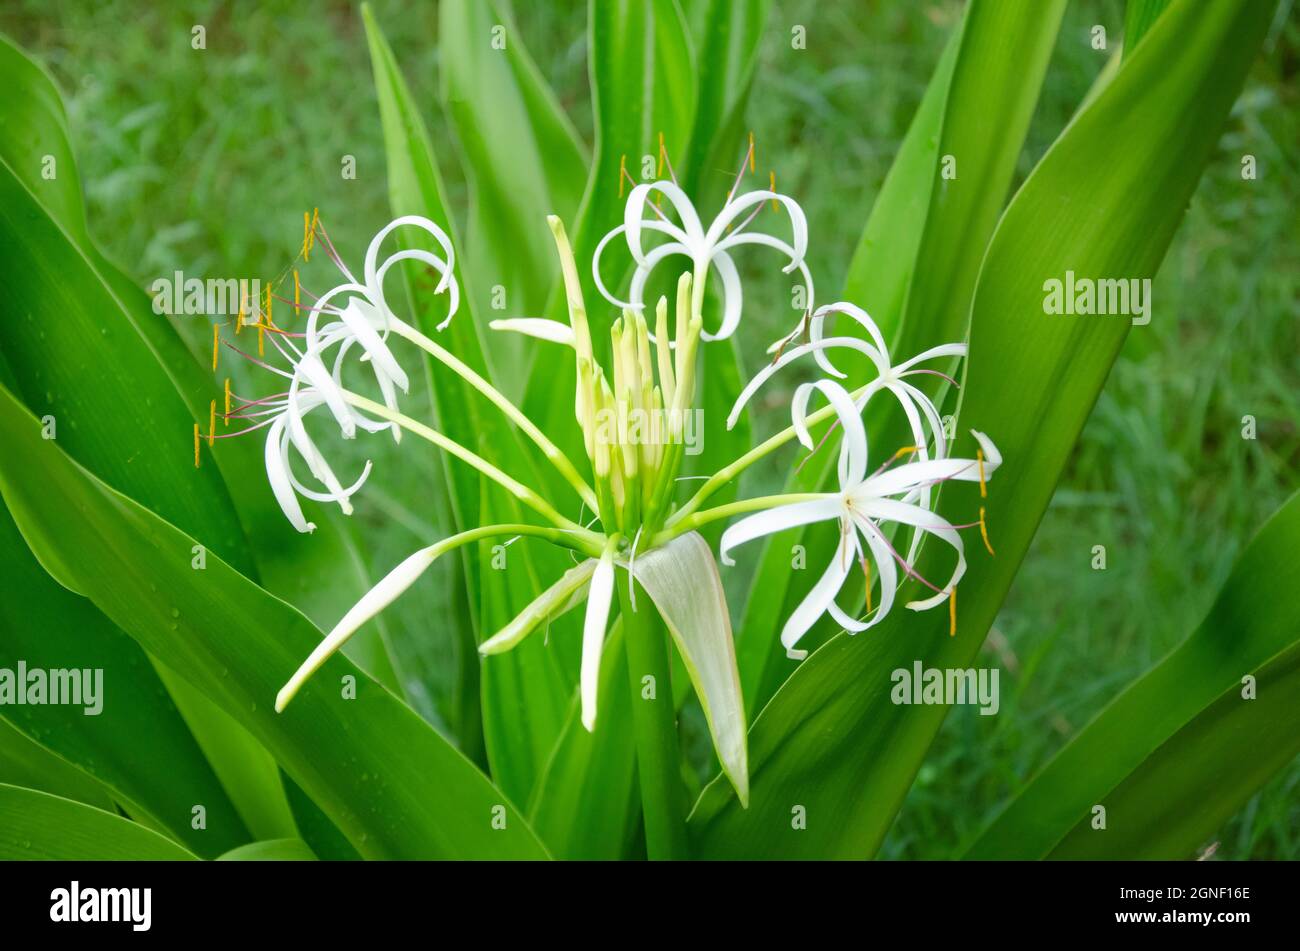 Selective Focus On Crinum Asiaticum Or Giant Lily Plant With Flower And Green Leaves Isolated With Blur Background In The Morning Sun Light In The Par Stock Photo